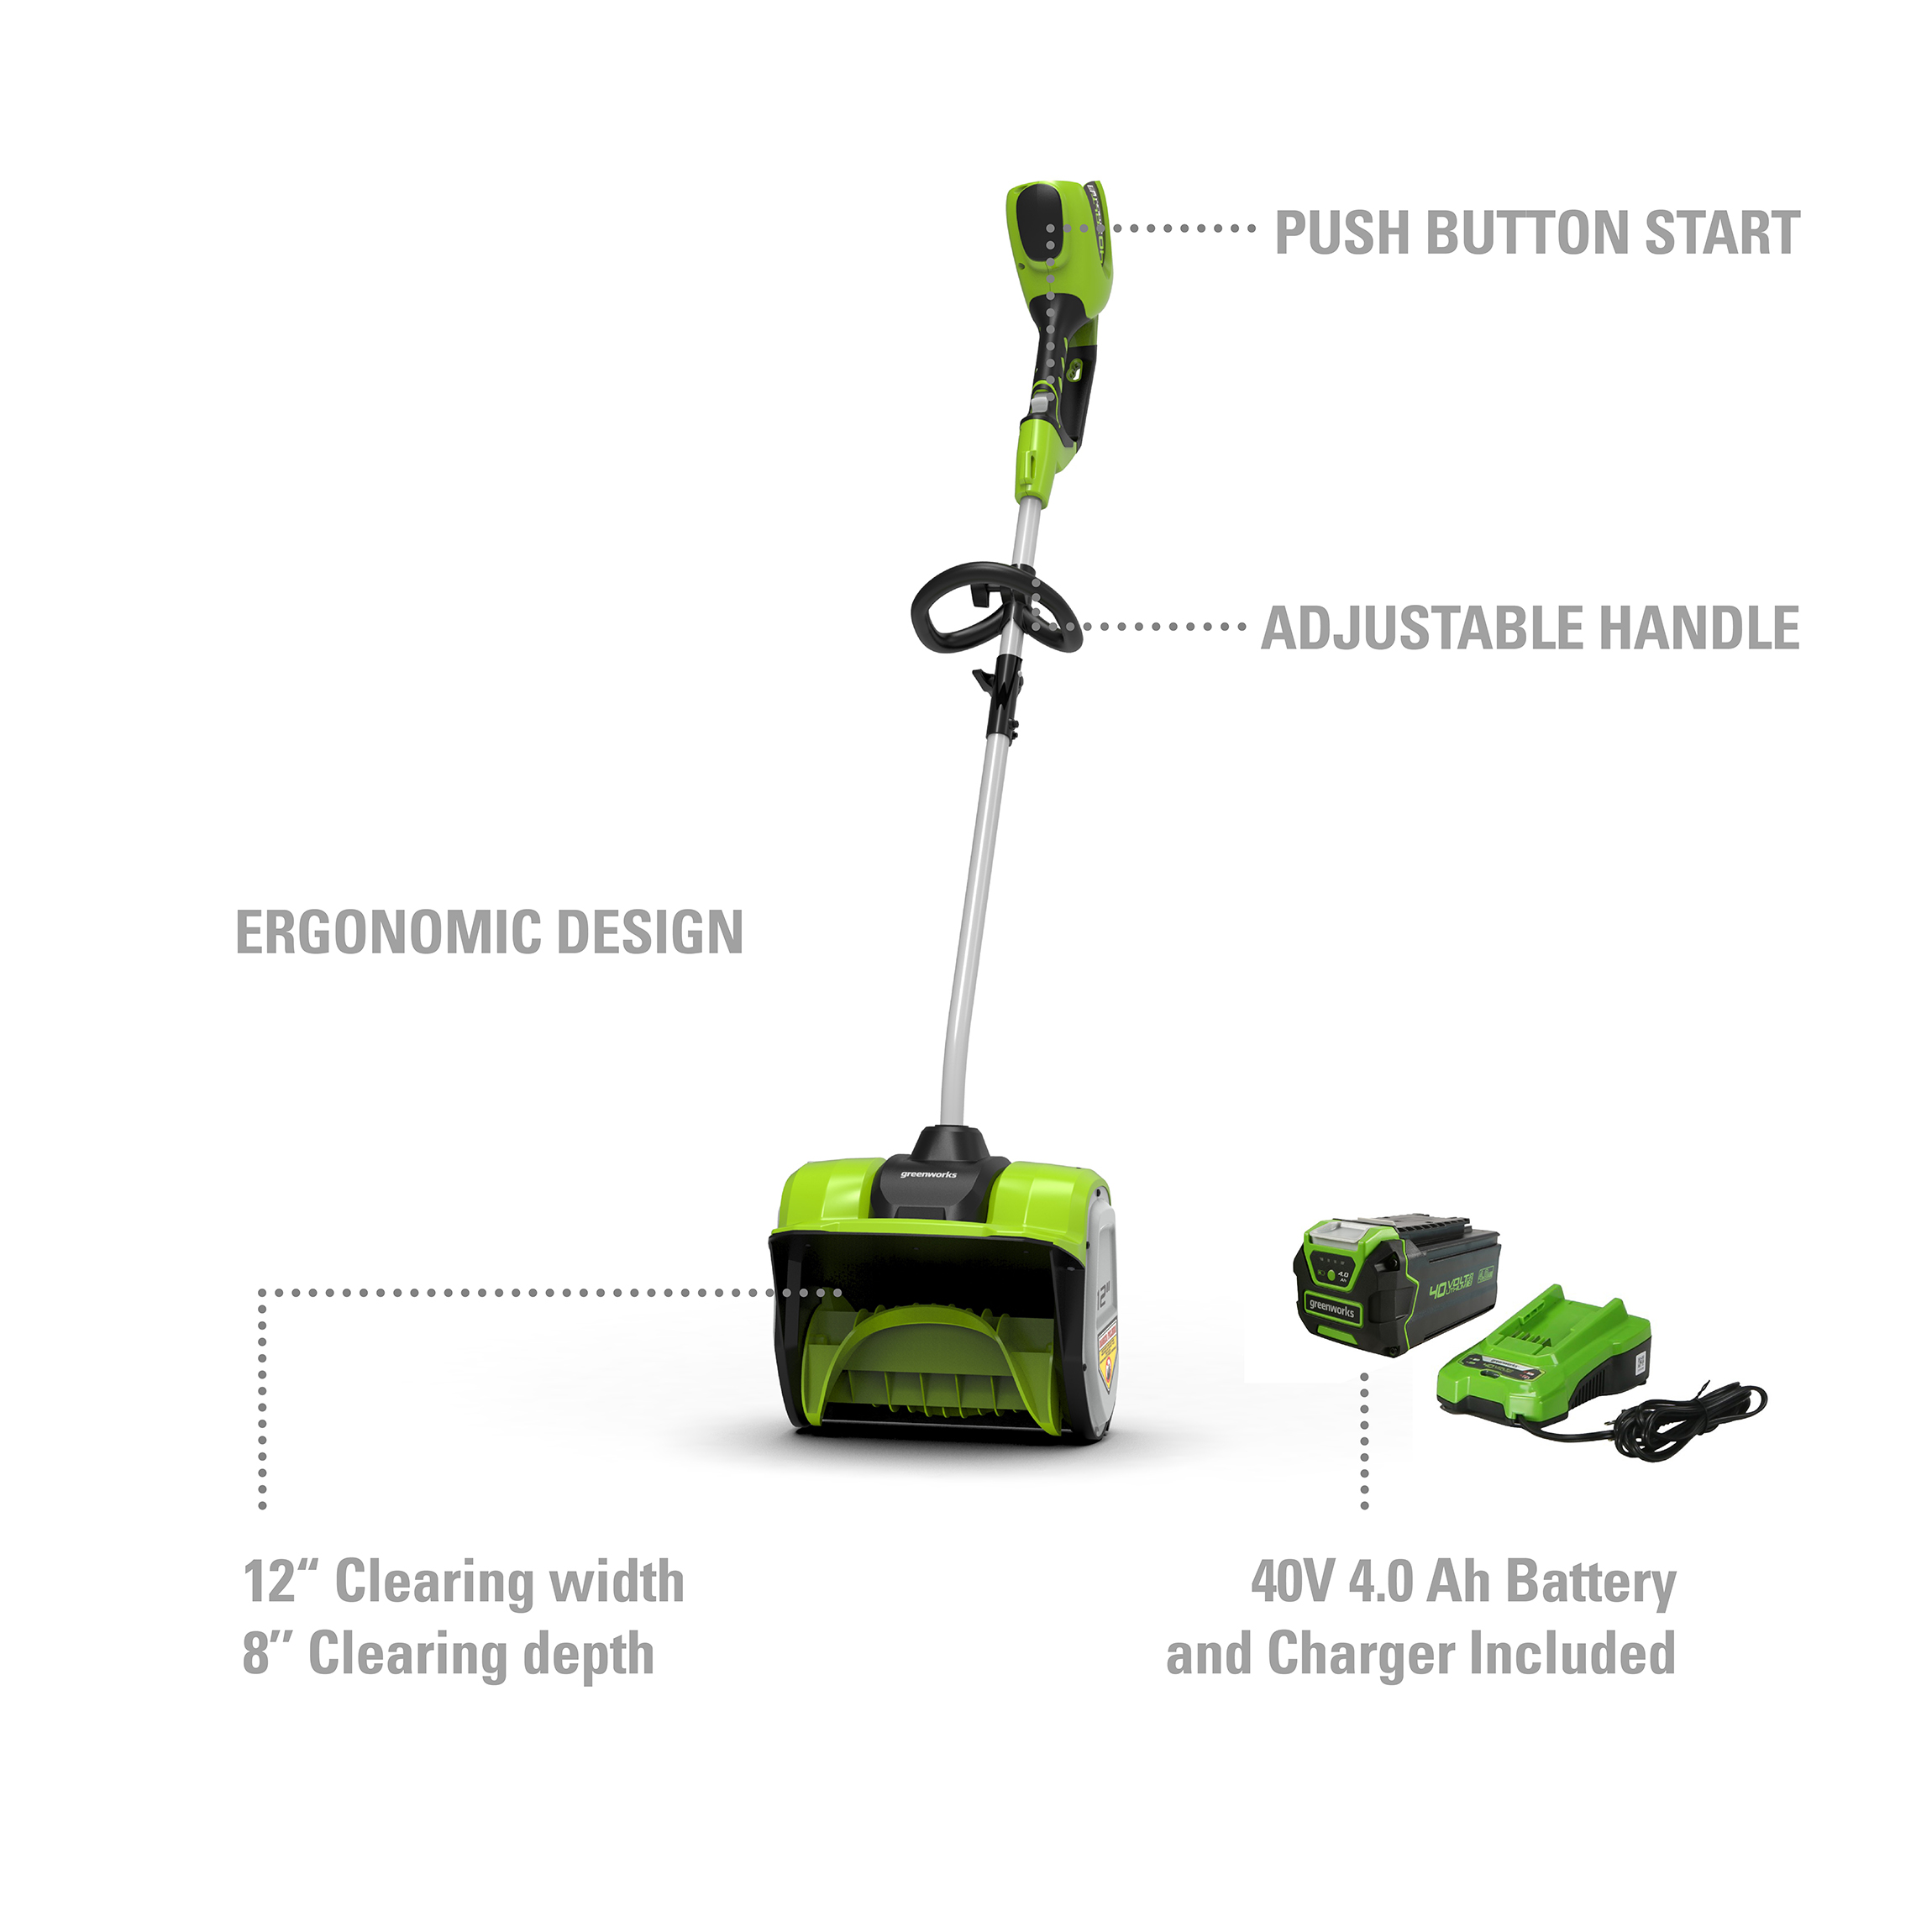 Greenworks 12" 40V Single-Stage Battery Powered Push Snow Blower - image 2 of 8